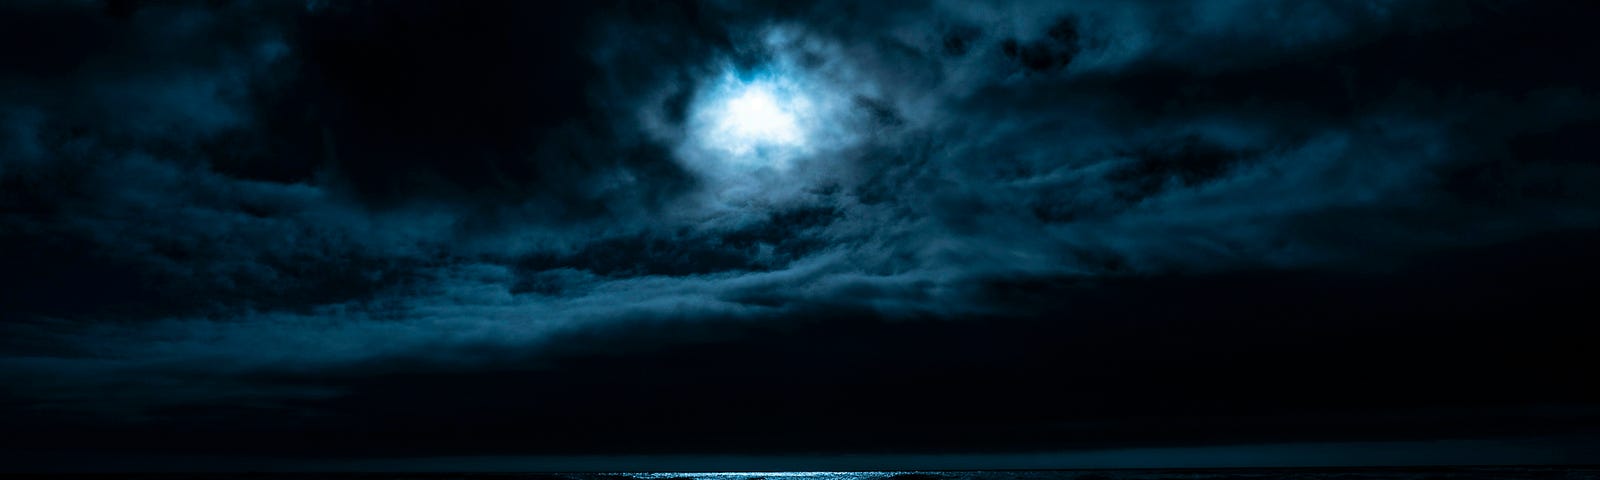 moon light peeking out from behind the clouds- you can see the white over water